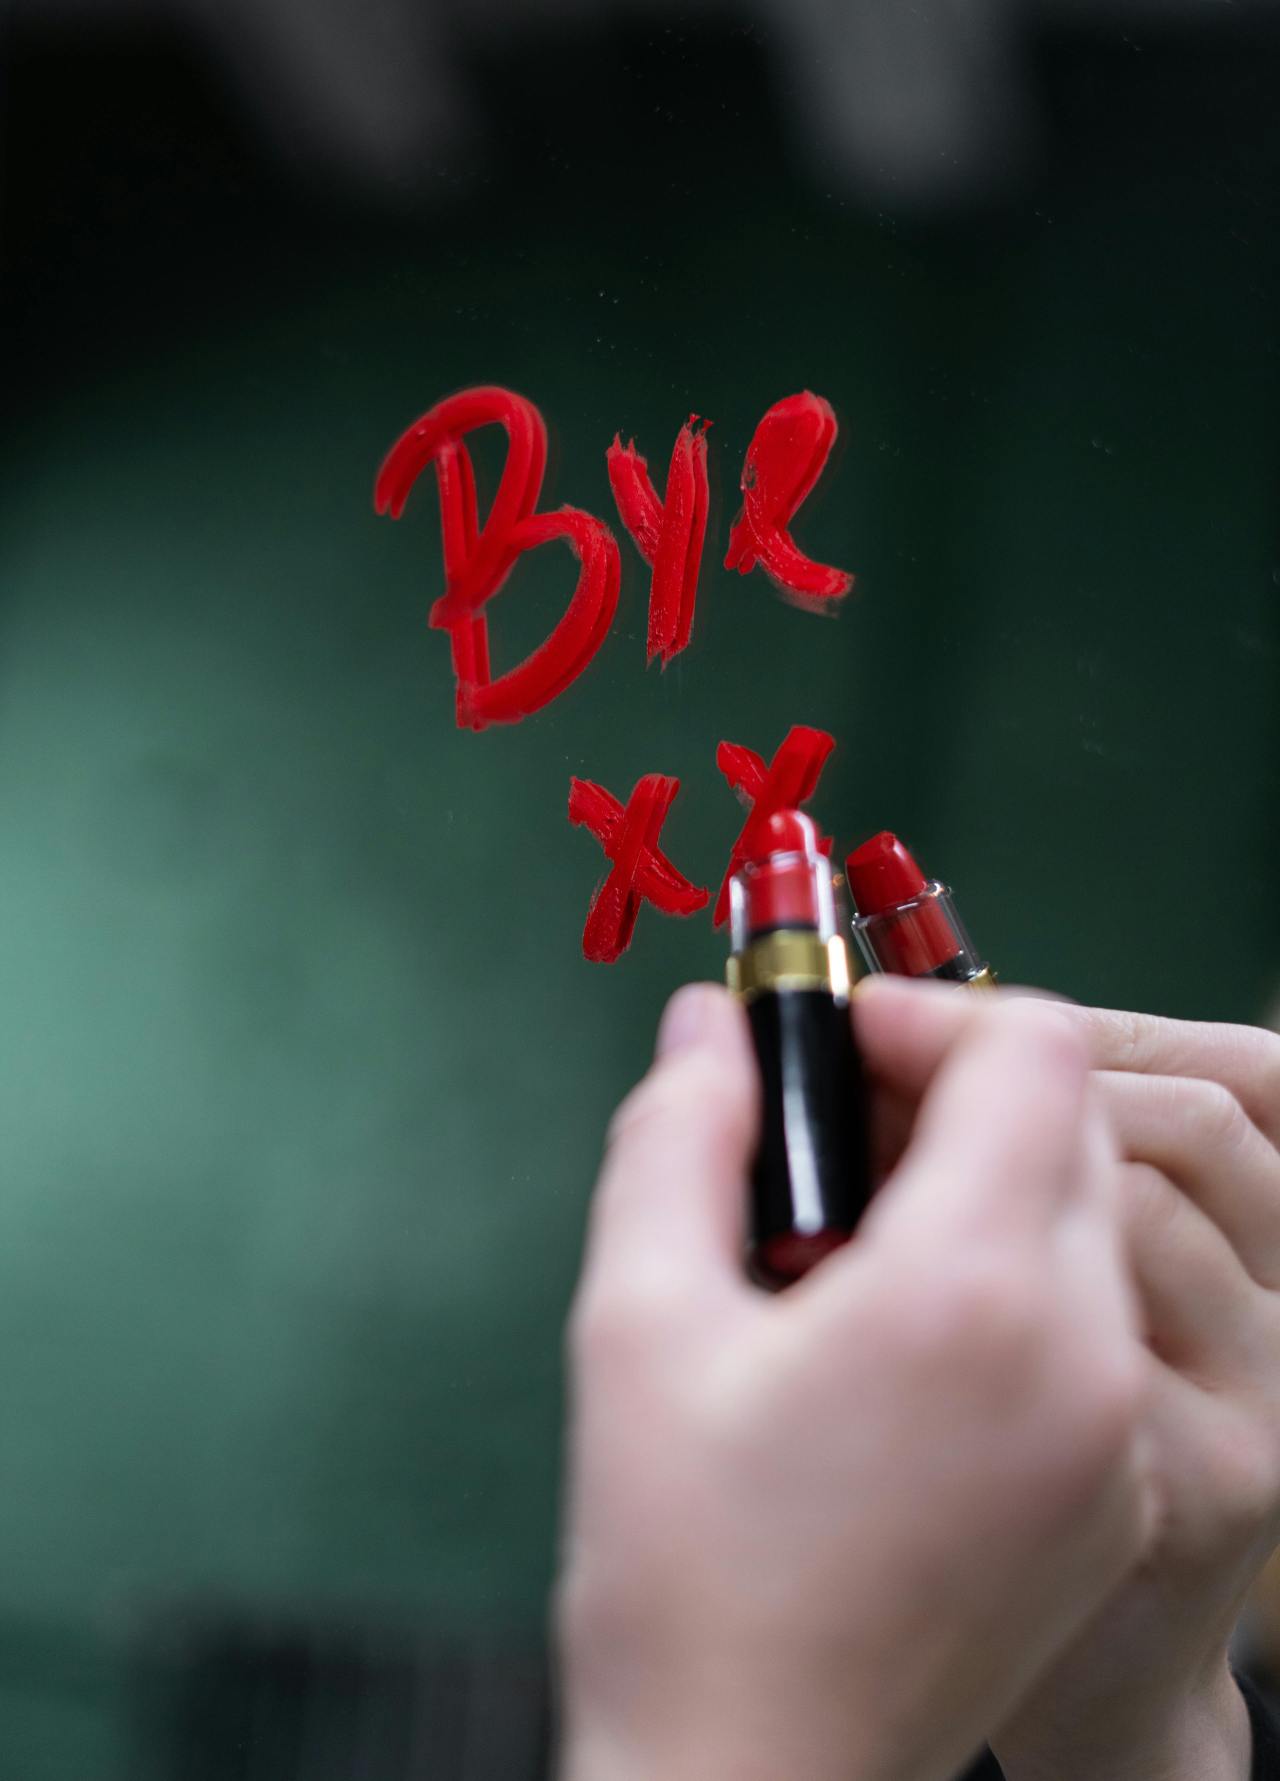 The word "Bye" followed by two Xs written in red lipstick on a mirror.